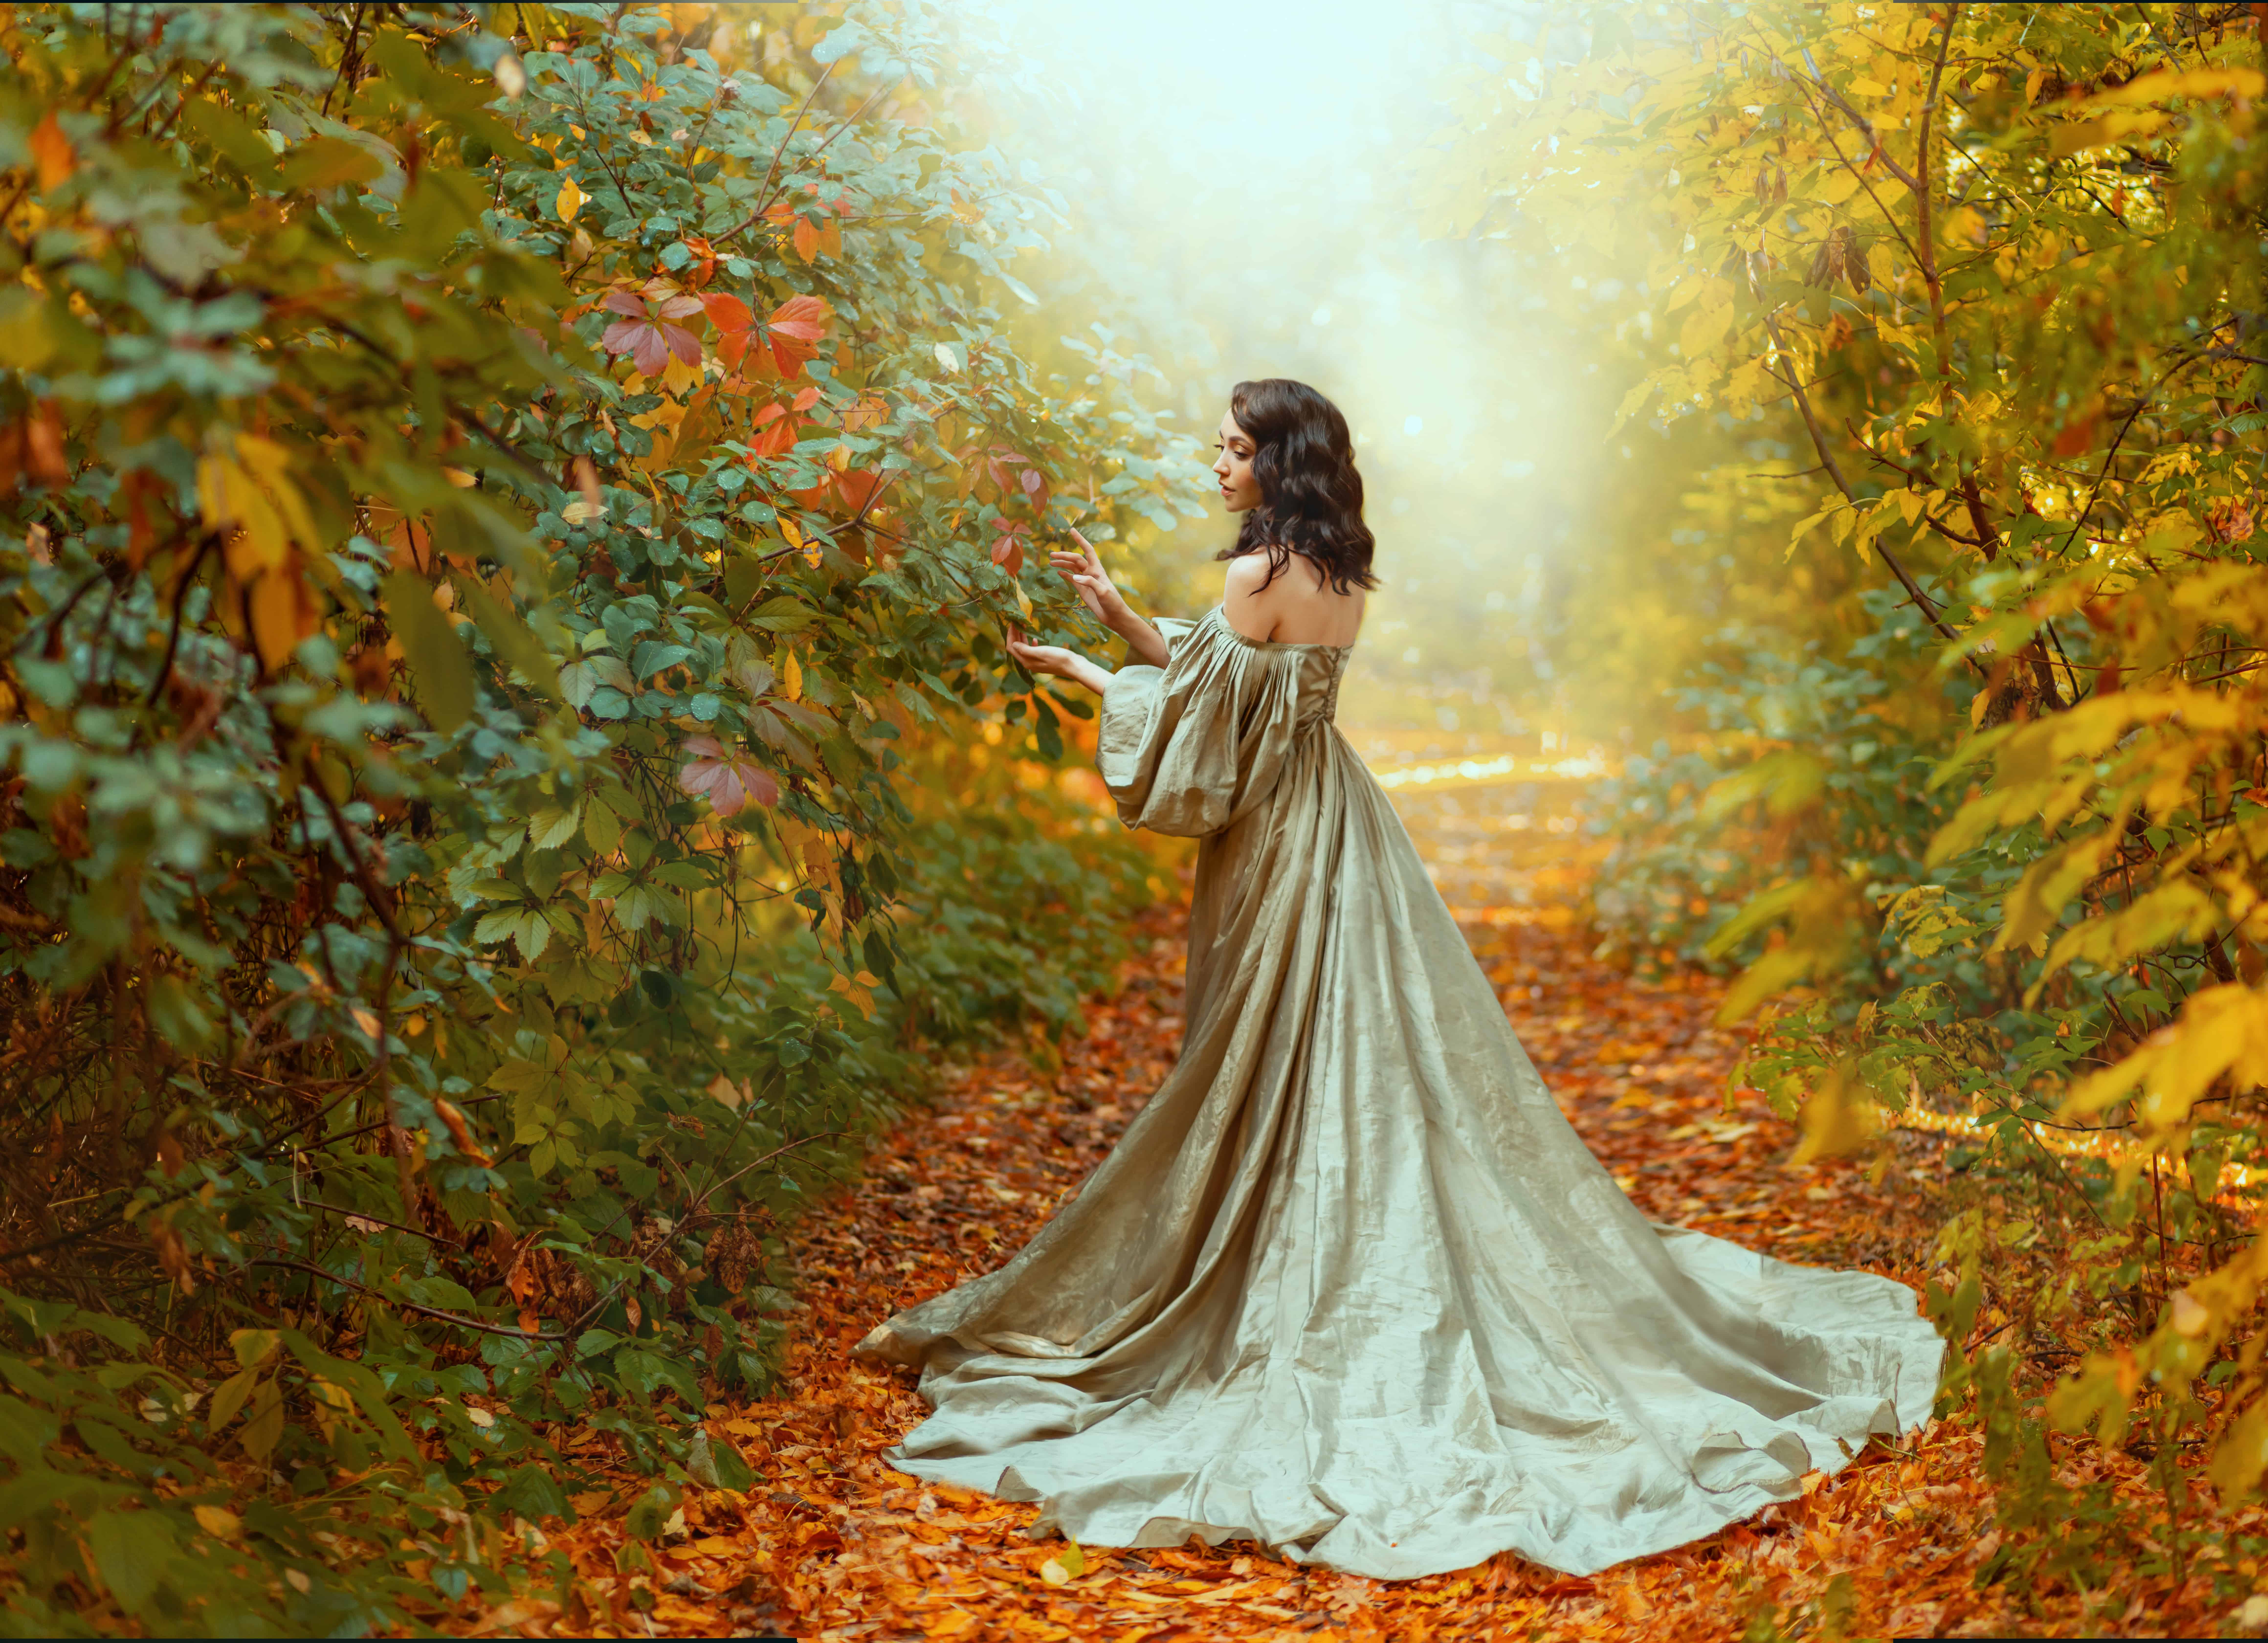 Queen woman walks in path, way mystical autumn forest. Orange foliage gothic trees mist smoke. Fantasy fairy princess girl touching leaves. Vintage long green dress, puffy sleeves. Sexy back rear view